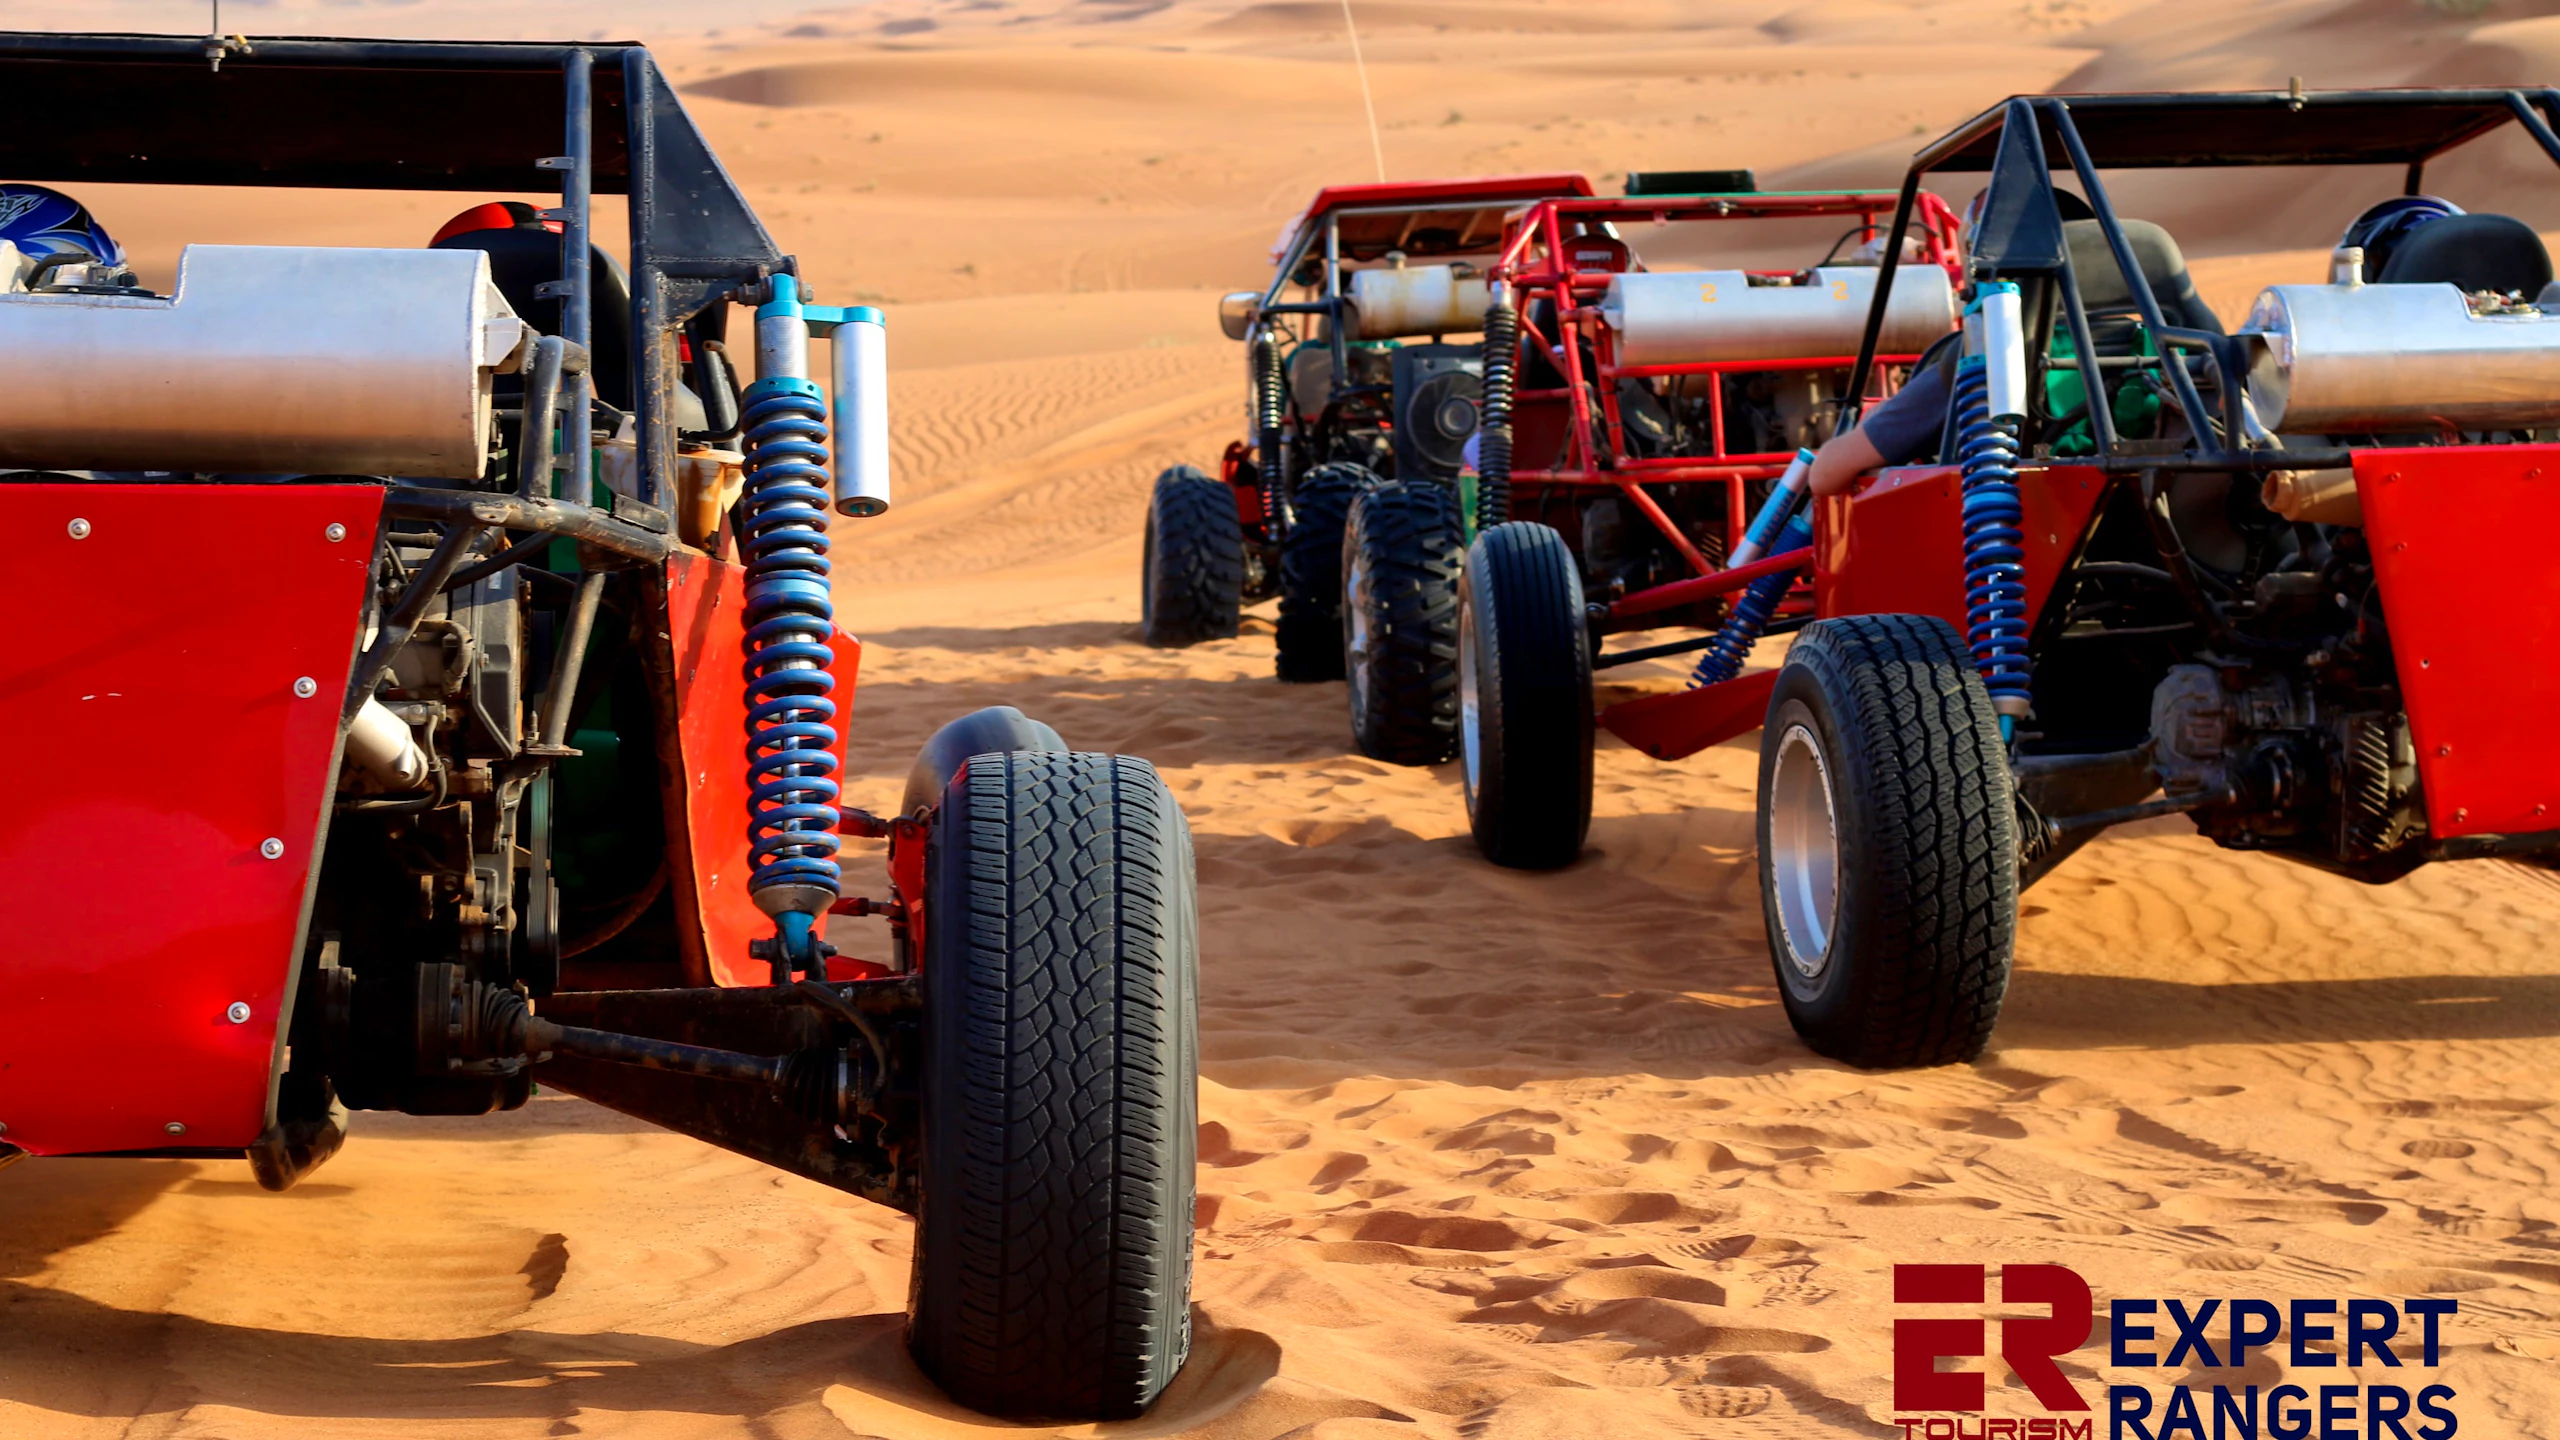 2 Seater Self-Drive Dune Buggy Safari with Pickup and Drop Off Category